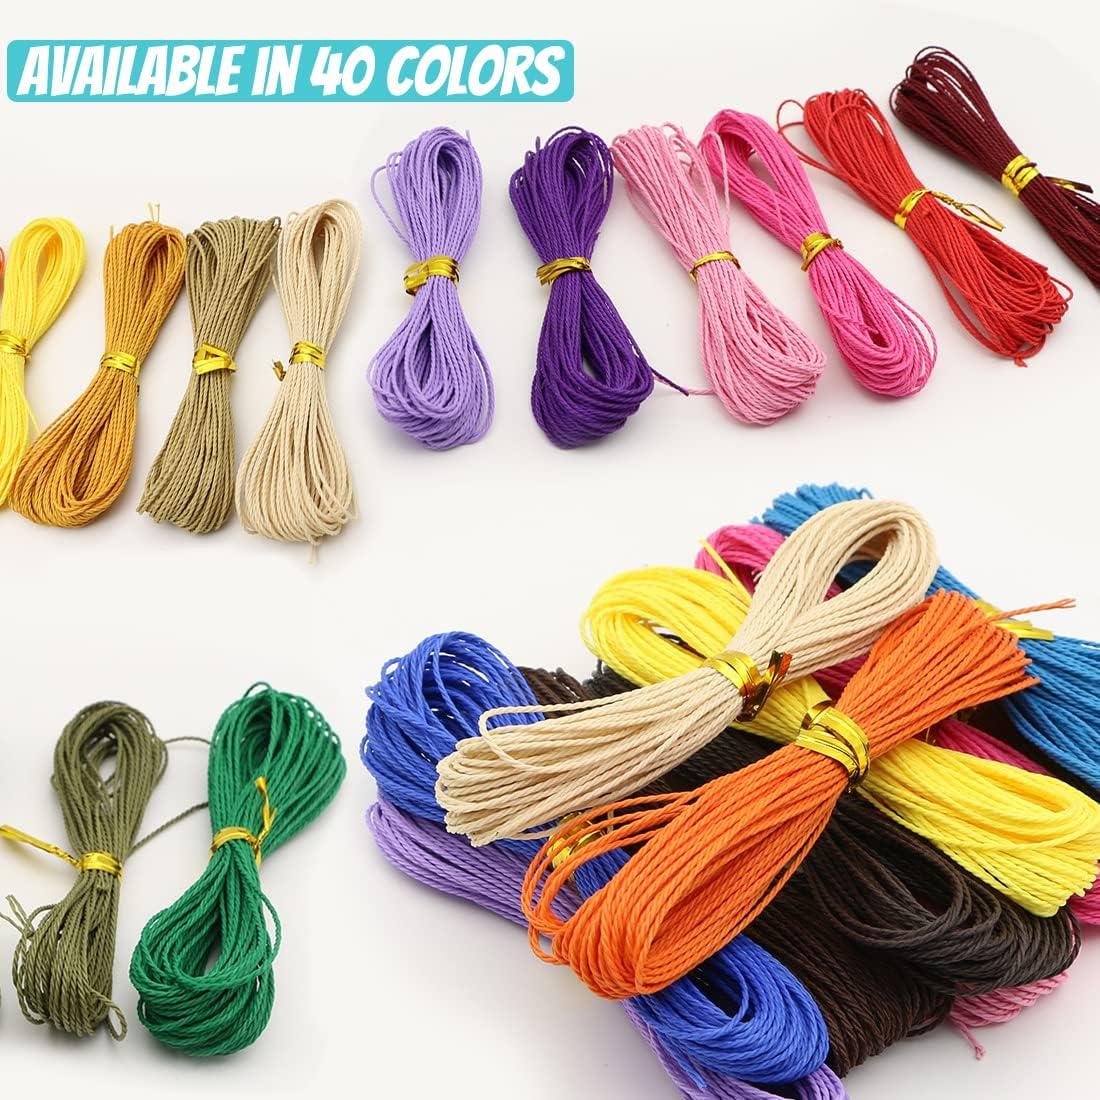 Color Cord Bracelet Cotton, Waxed Cord Jewelry Making